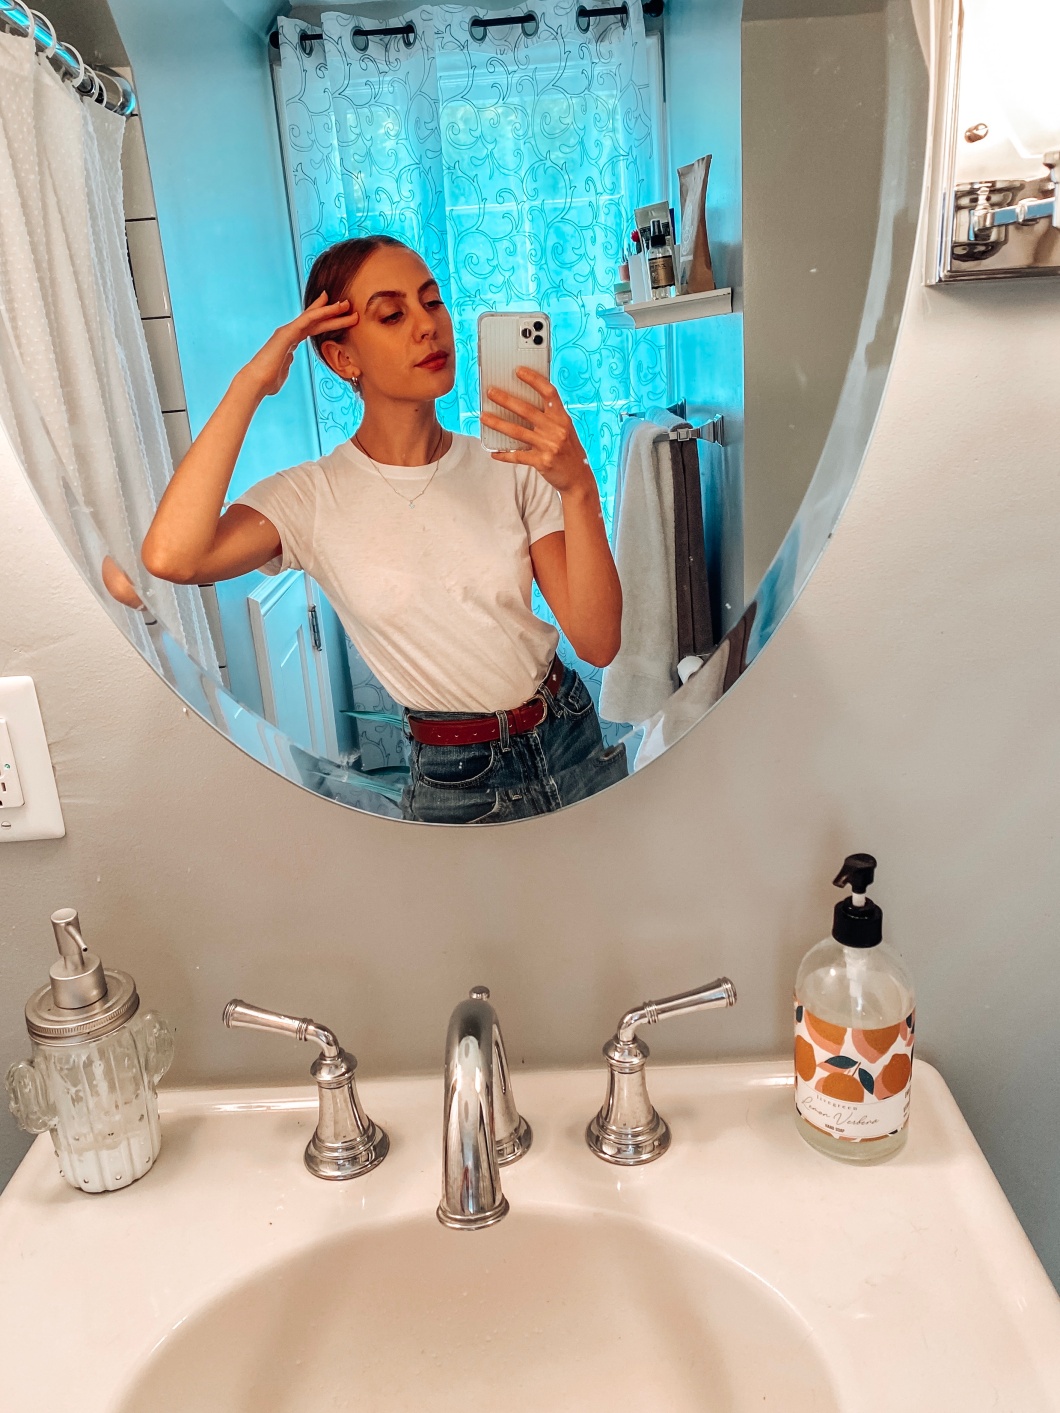 Candace taking a mirror selfie in front of her bathroom sink.